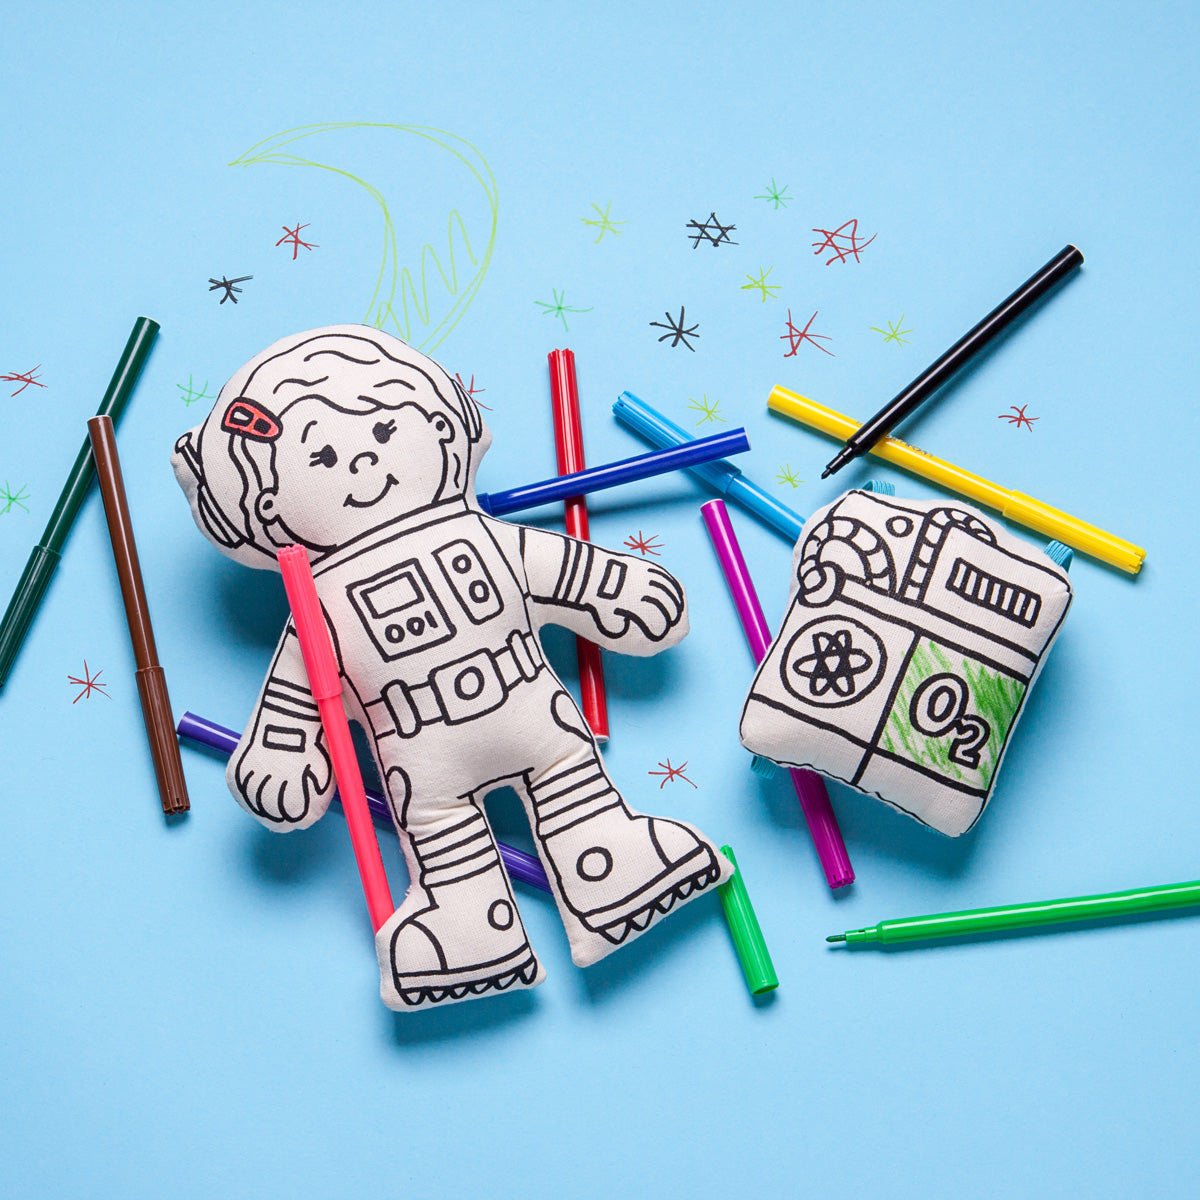 Kiboo Kids Space Explorer: Girl Astronaut Doll With Mini Space Pack - Educational And Imaginative Play Toy